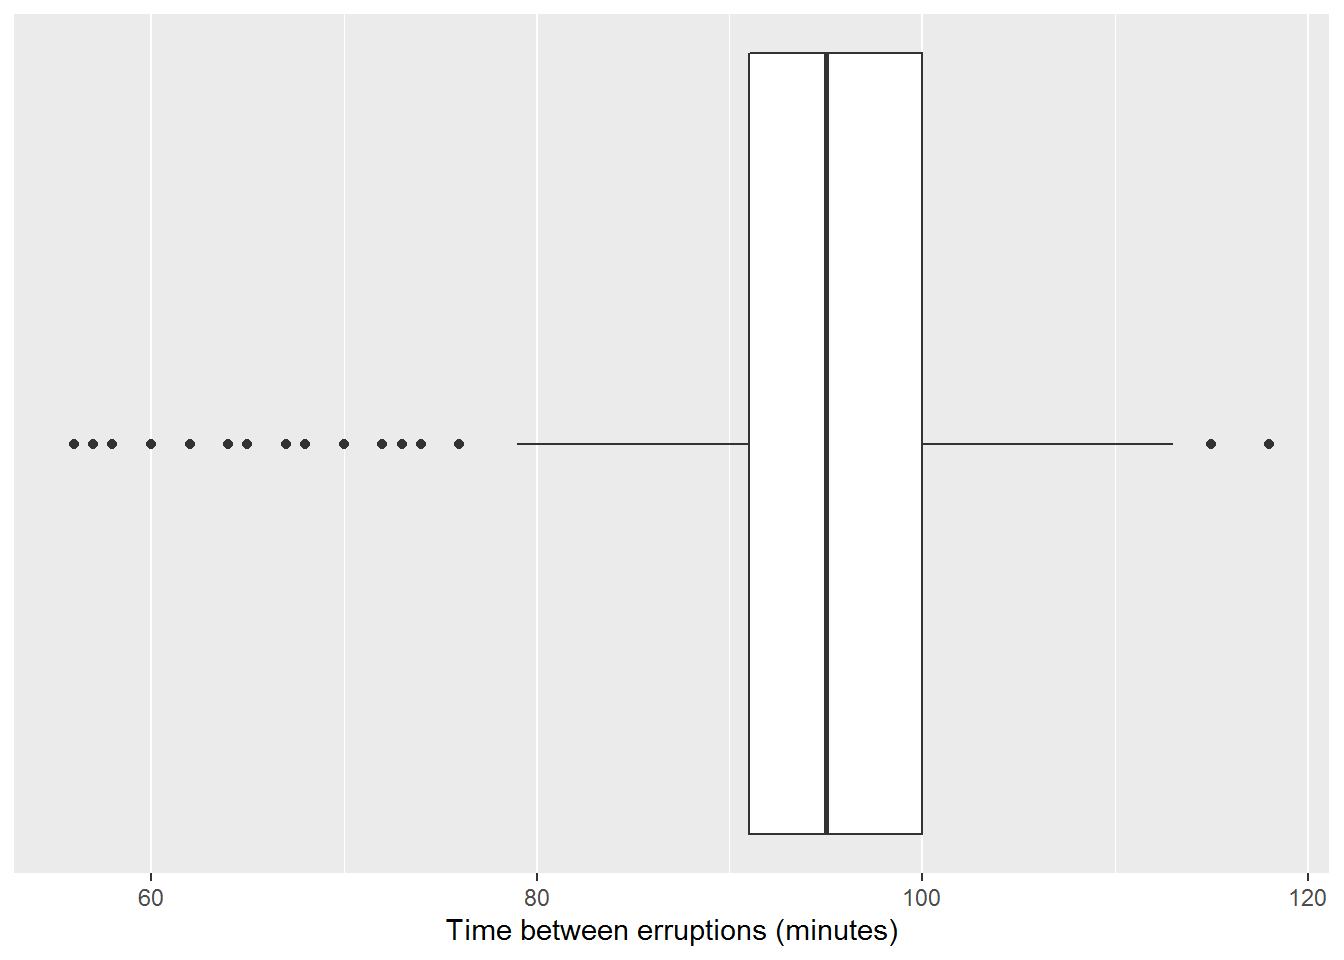 Box Plot of Eruption Times Using R and ggplots2